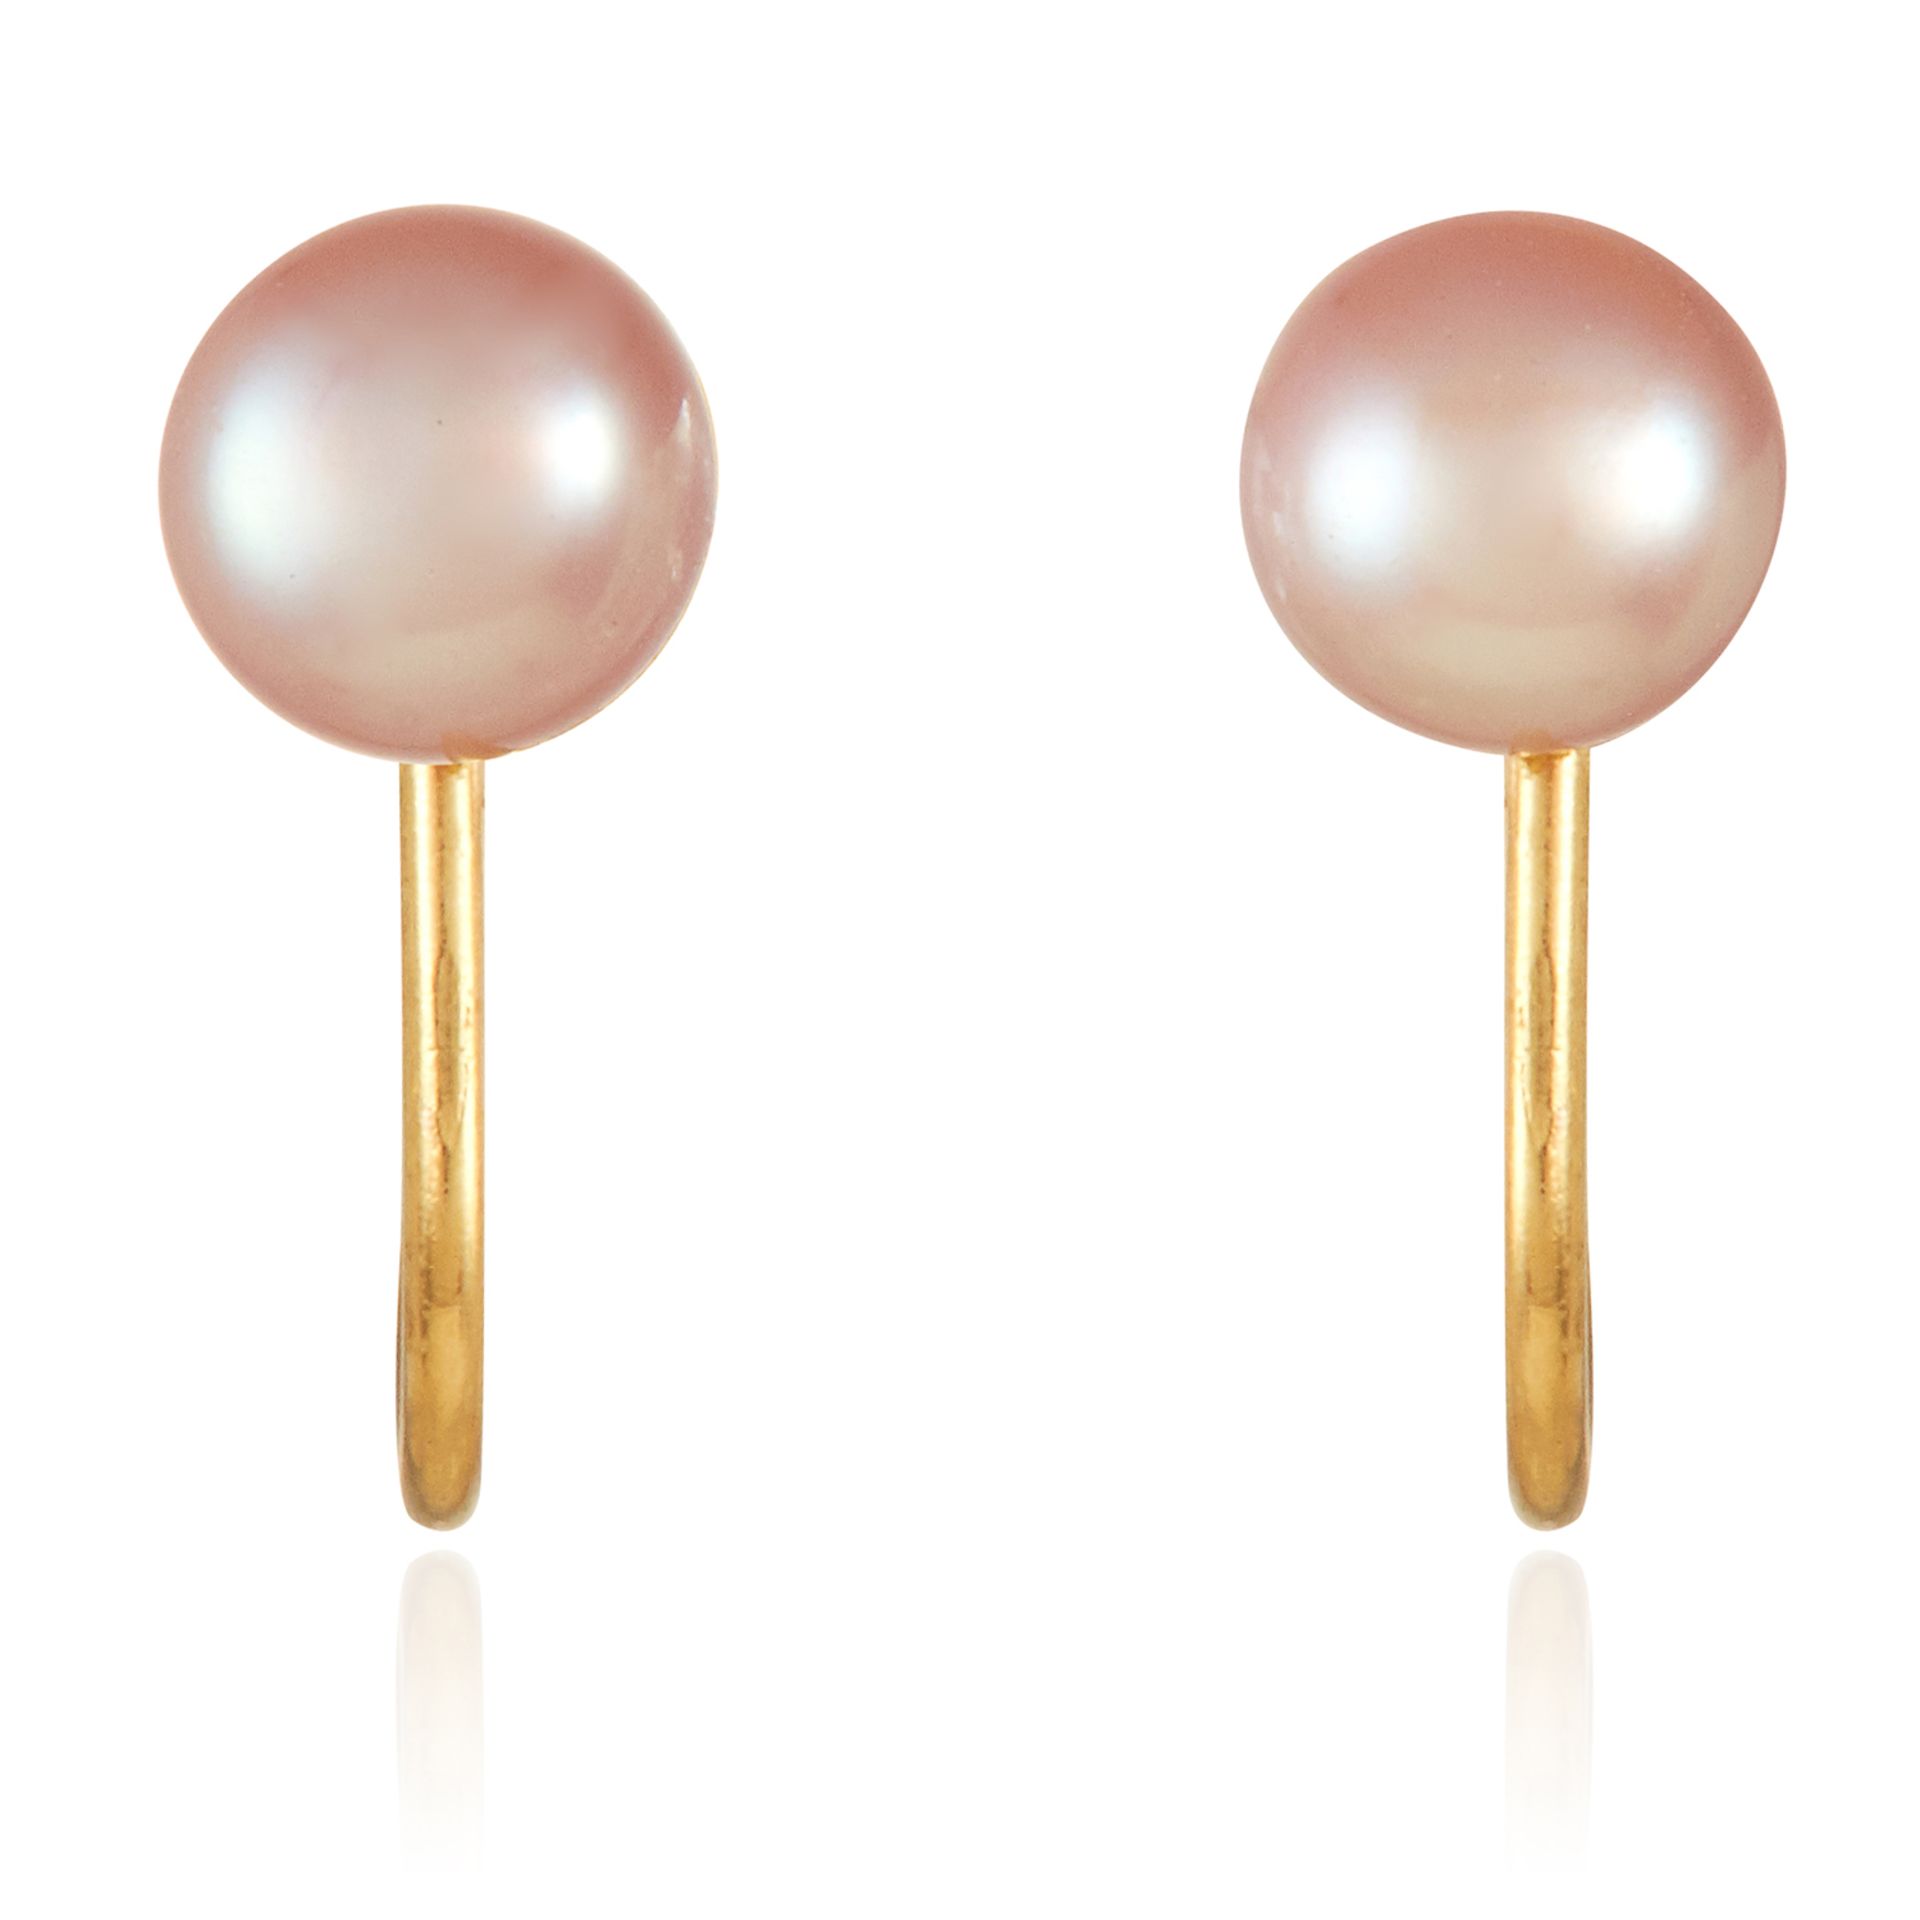 A PAIR OF PEARL EARRINGS in yellow gold, each set with a pearl of approximately 5.8mm, stamped